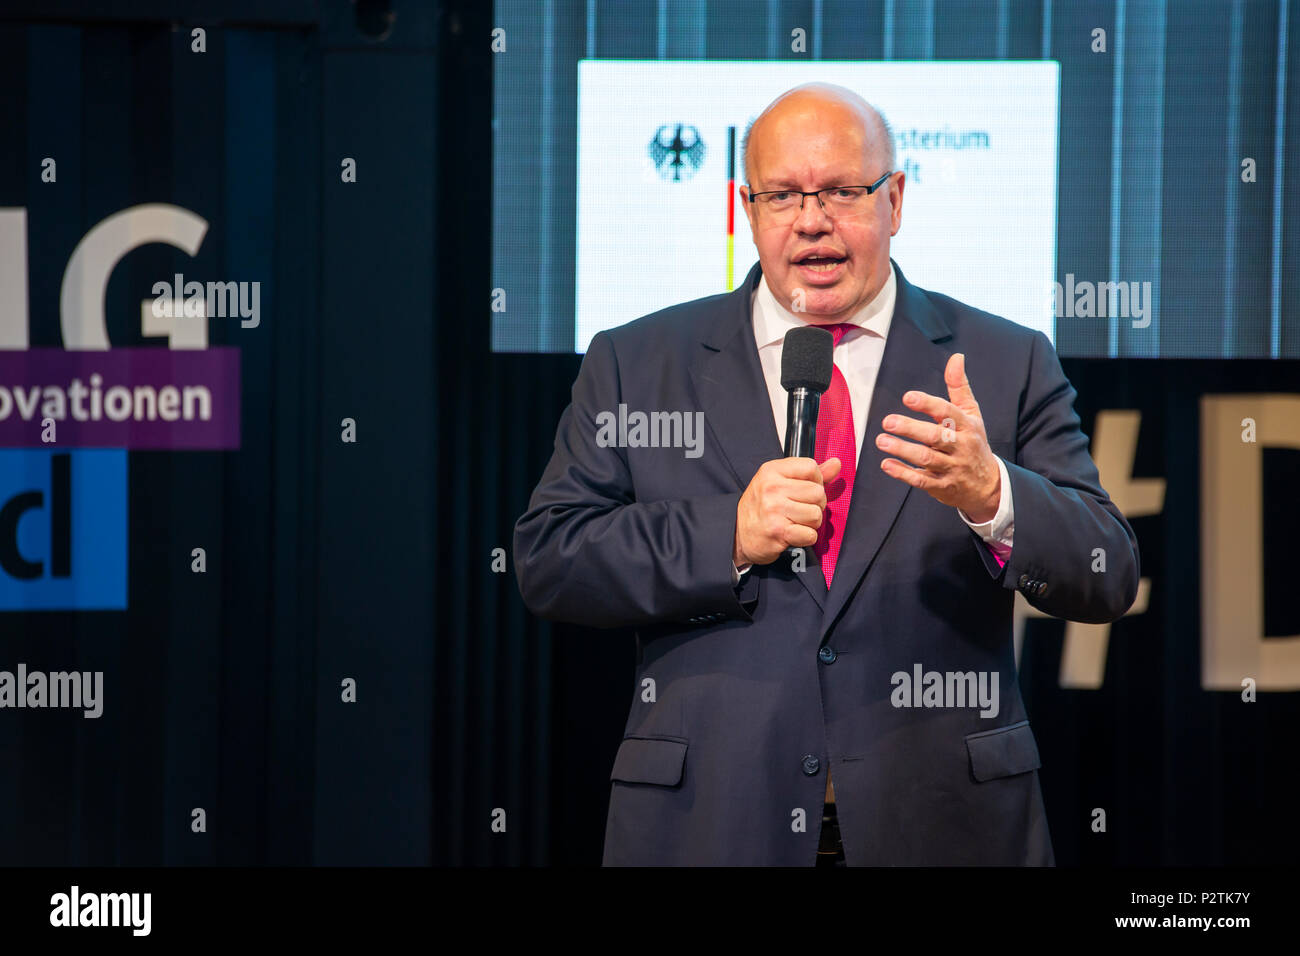 Hannover, Germany. 12th June, 2018. CEBIT 2018 opening walk with Peter Altmaier, Federal Minister for Economic Affairs and Energy Germany. CEBIT 2018, international computer expo and Europe's Business Festival for Innovation and Digitization. Credit: Christian Lademann Stock Photo